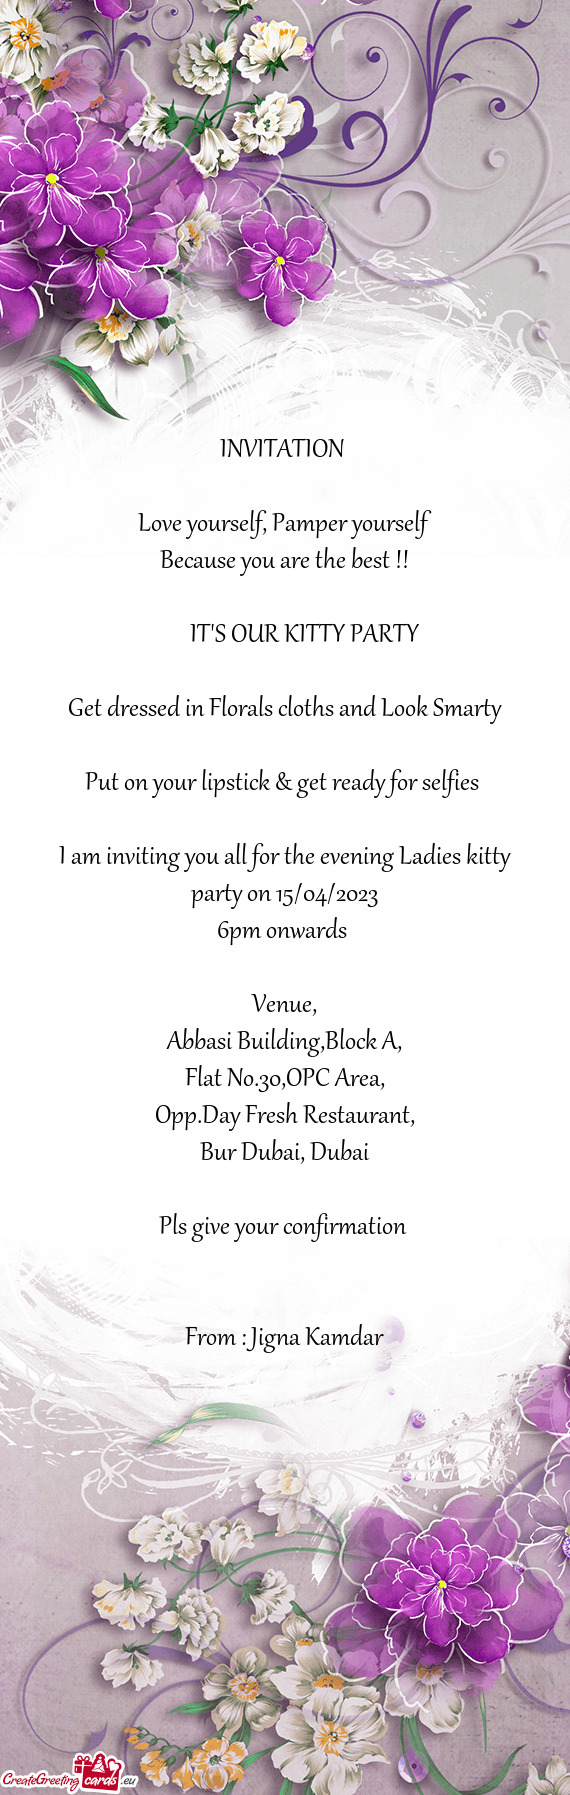 I am inviting you all for the evening Ladies kitty party on 15/04/2023